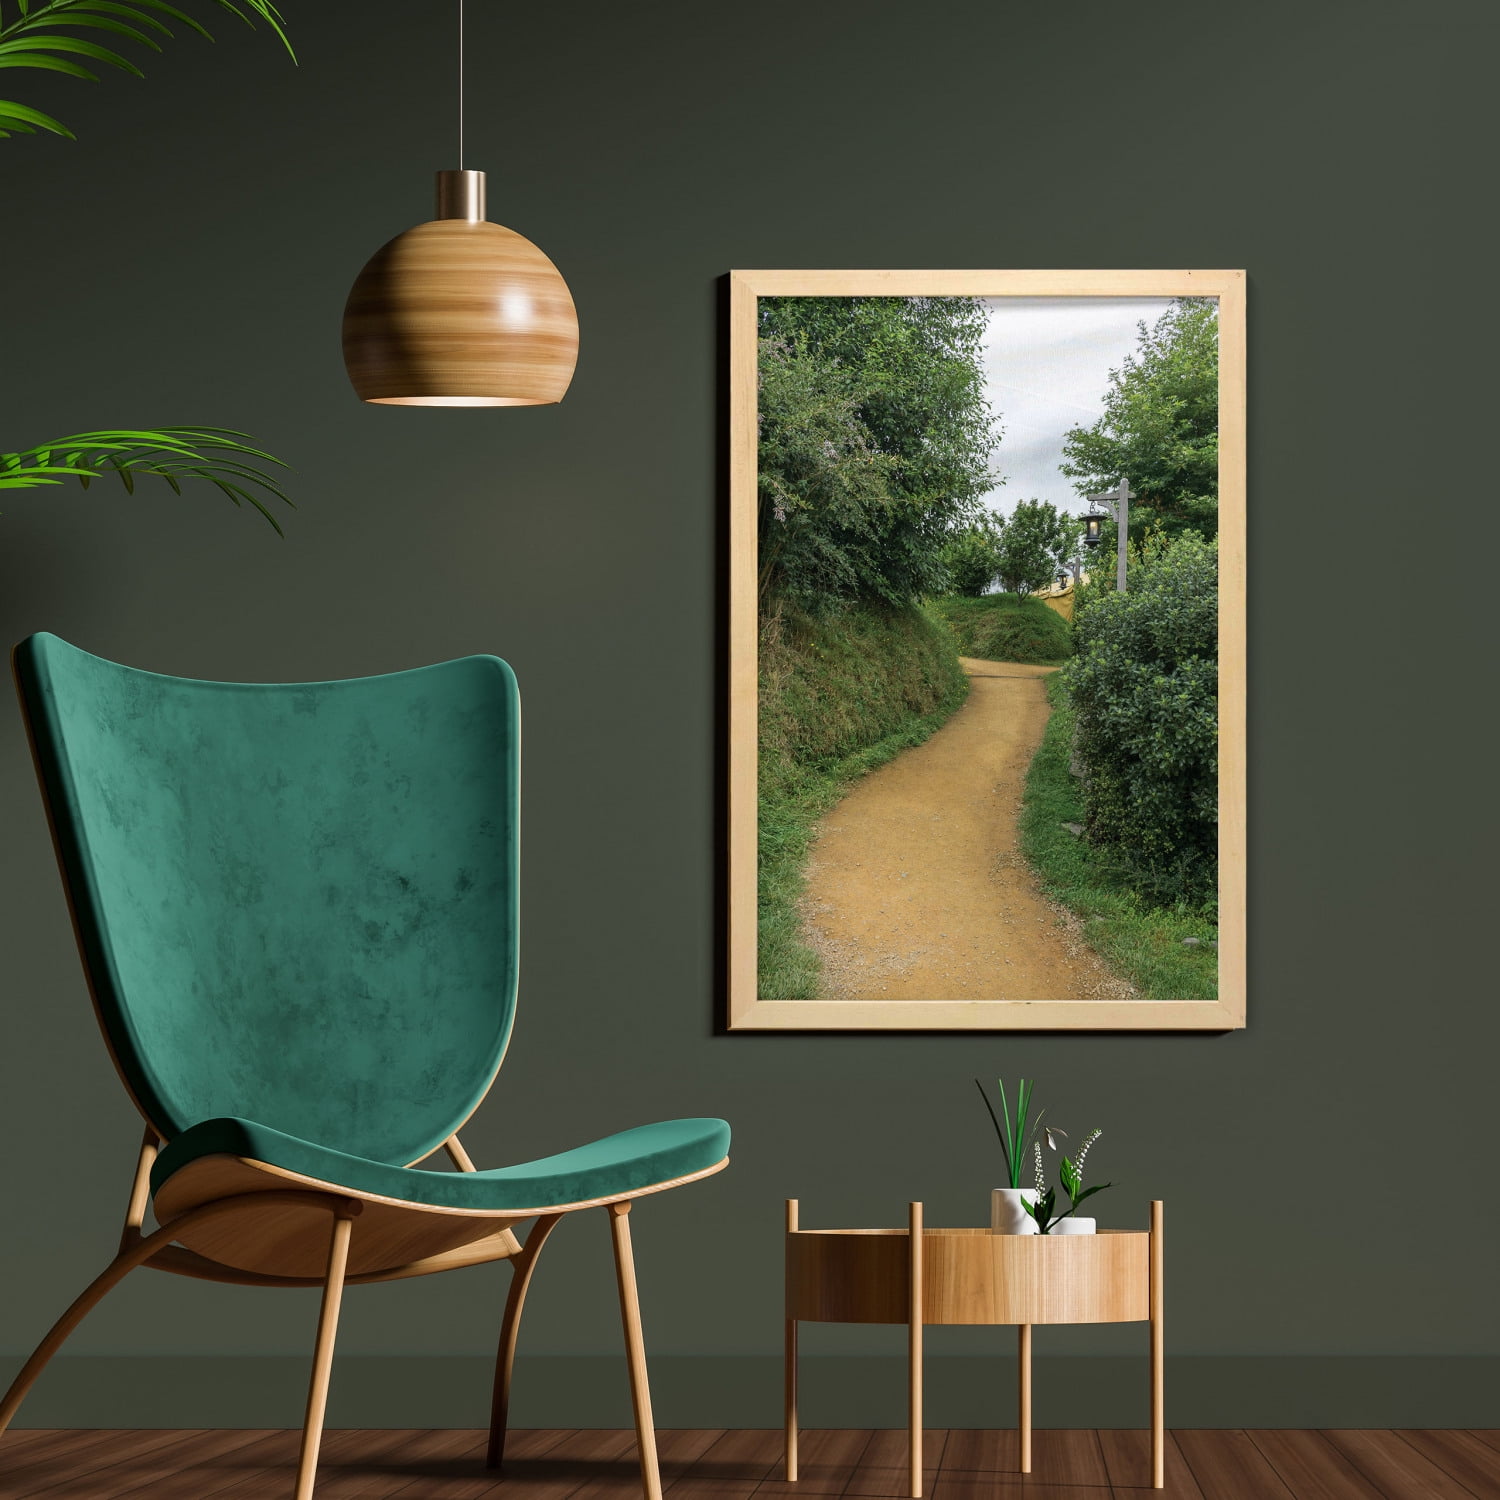 Hobbits Tapestry, Elf Path in Woods of Hobbit Land in The Shire New Zealand  Movie Set Image Print, Fabric Wall Hanging Decor for Bedroom Living Room  Dorm, 2 Sizes, Green Brown, by